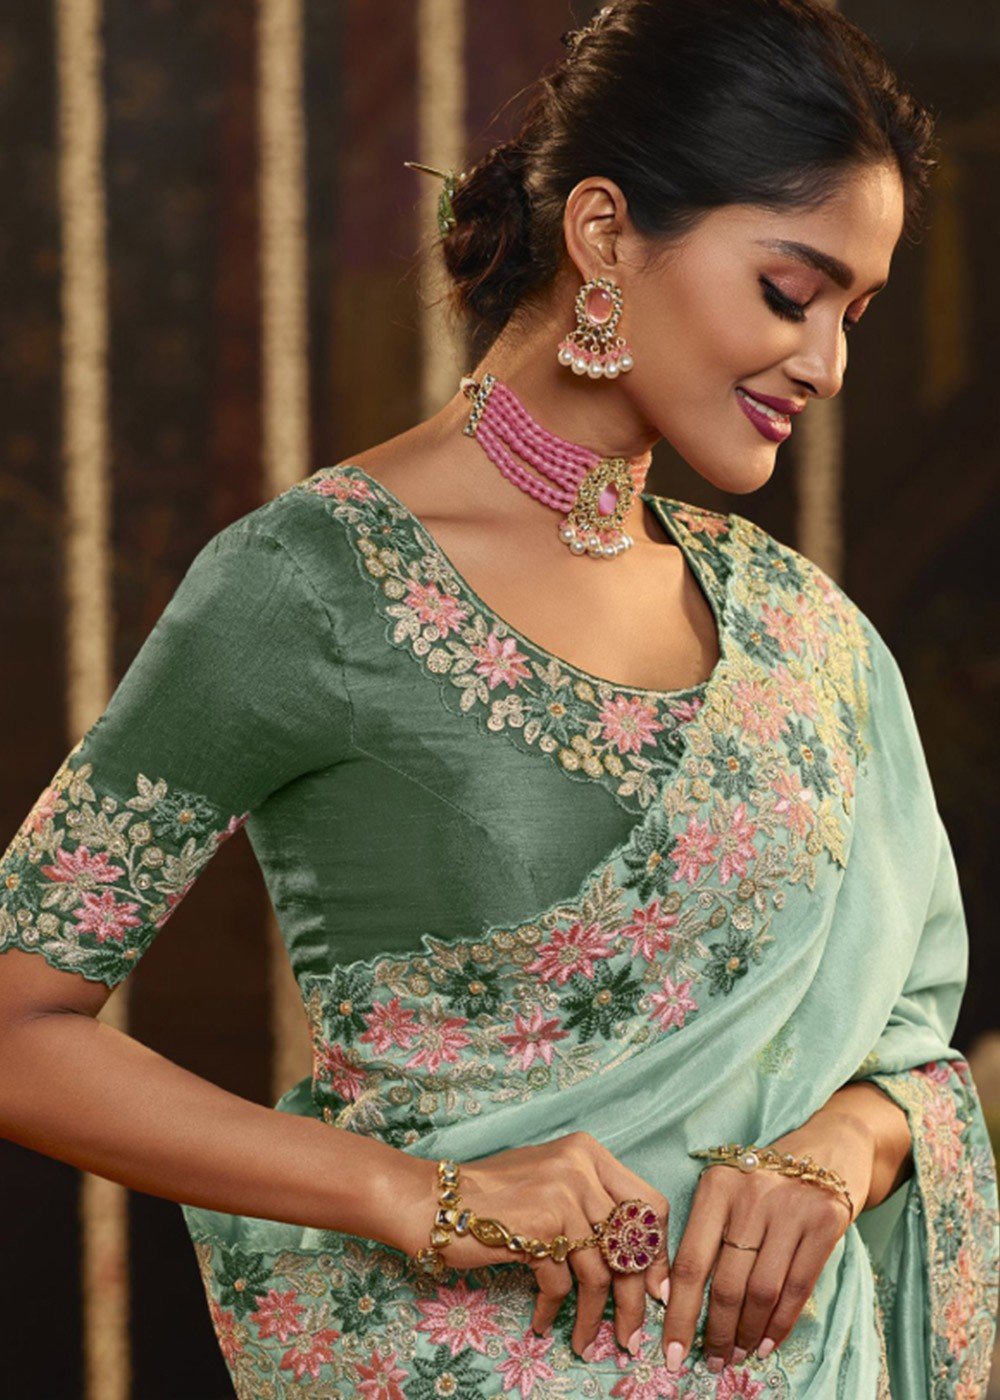 Silk Green Saree in Embroidered,lace - SR23275